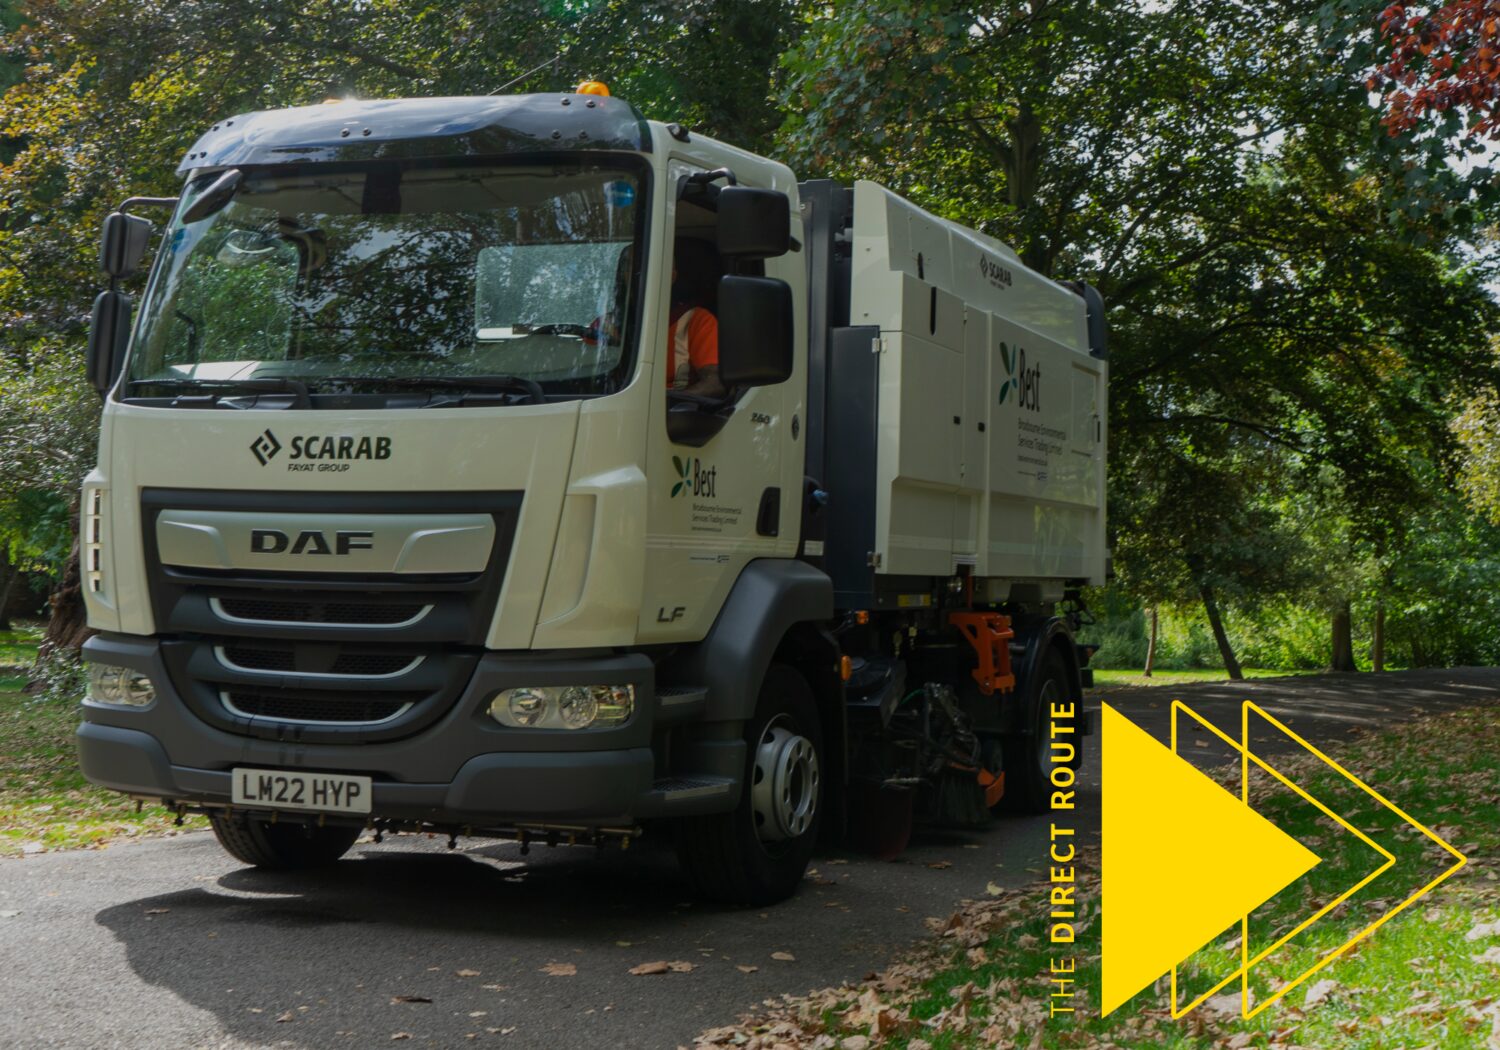 Broxbourne Environmental Services Trading Take the Direct Route